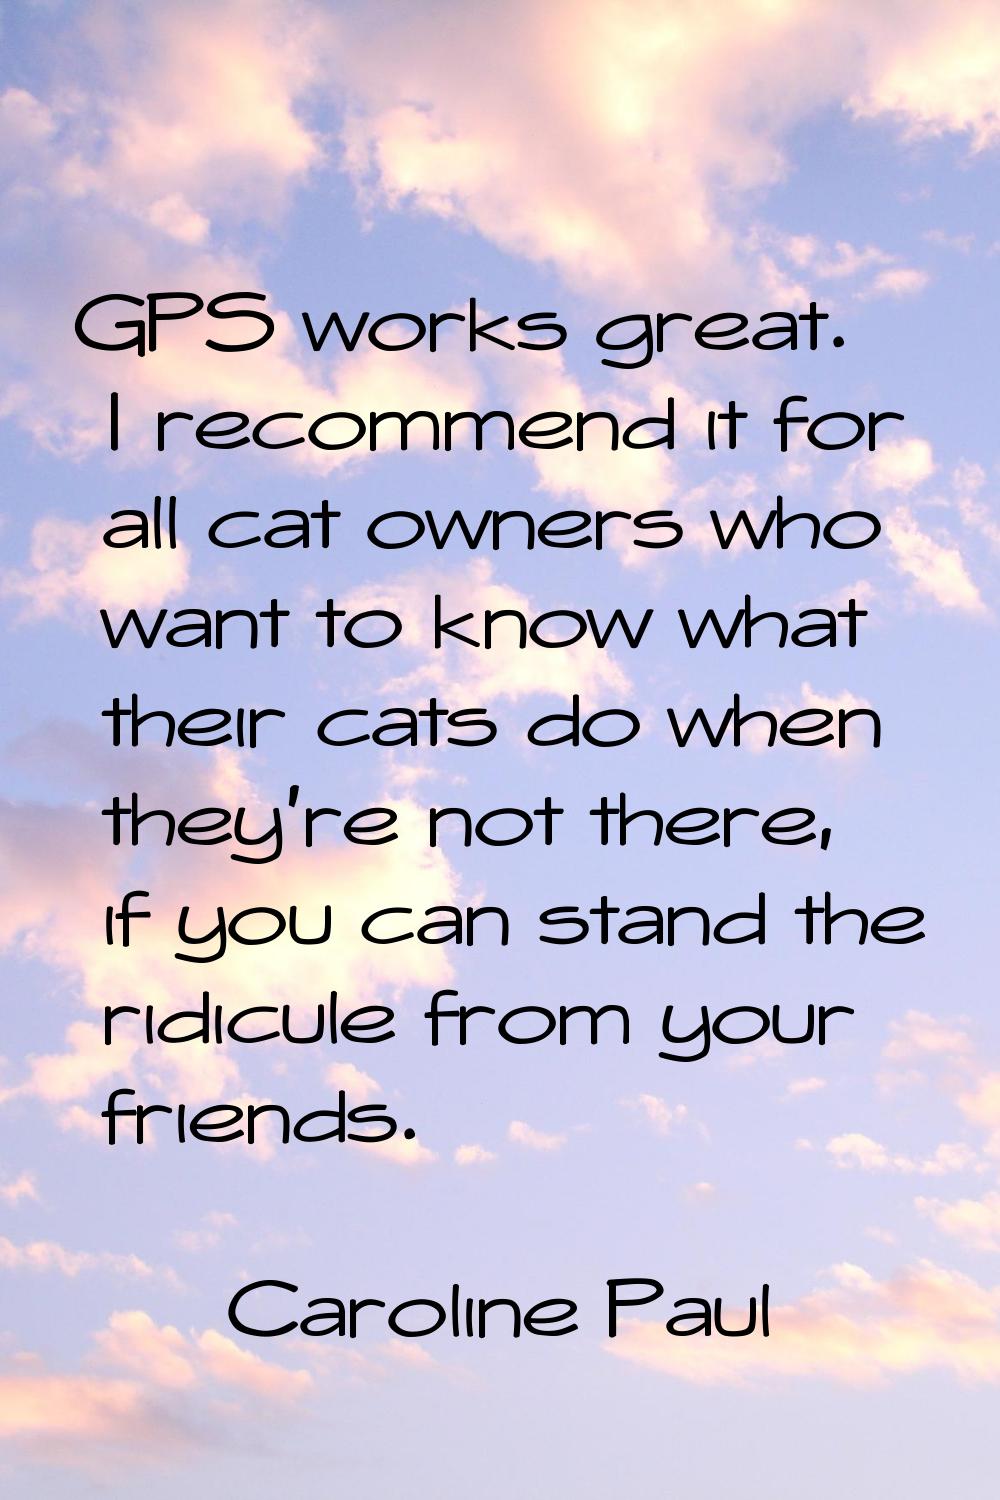 GPS works great. I recommend it for all cat owners who want to know what their cats do when they're